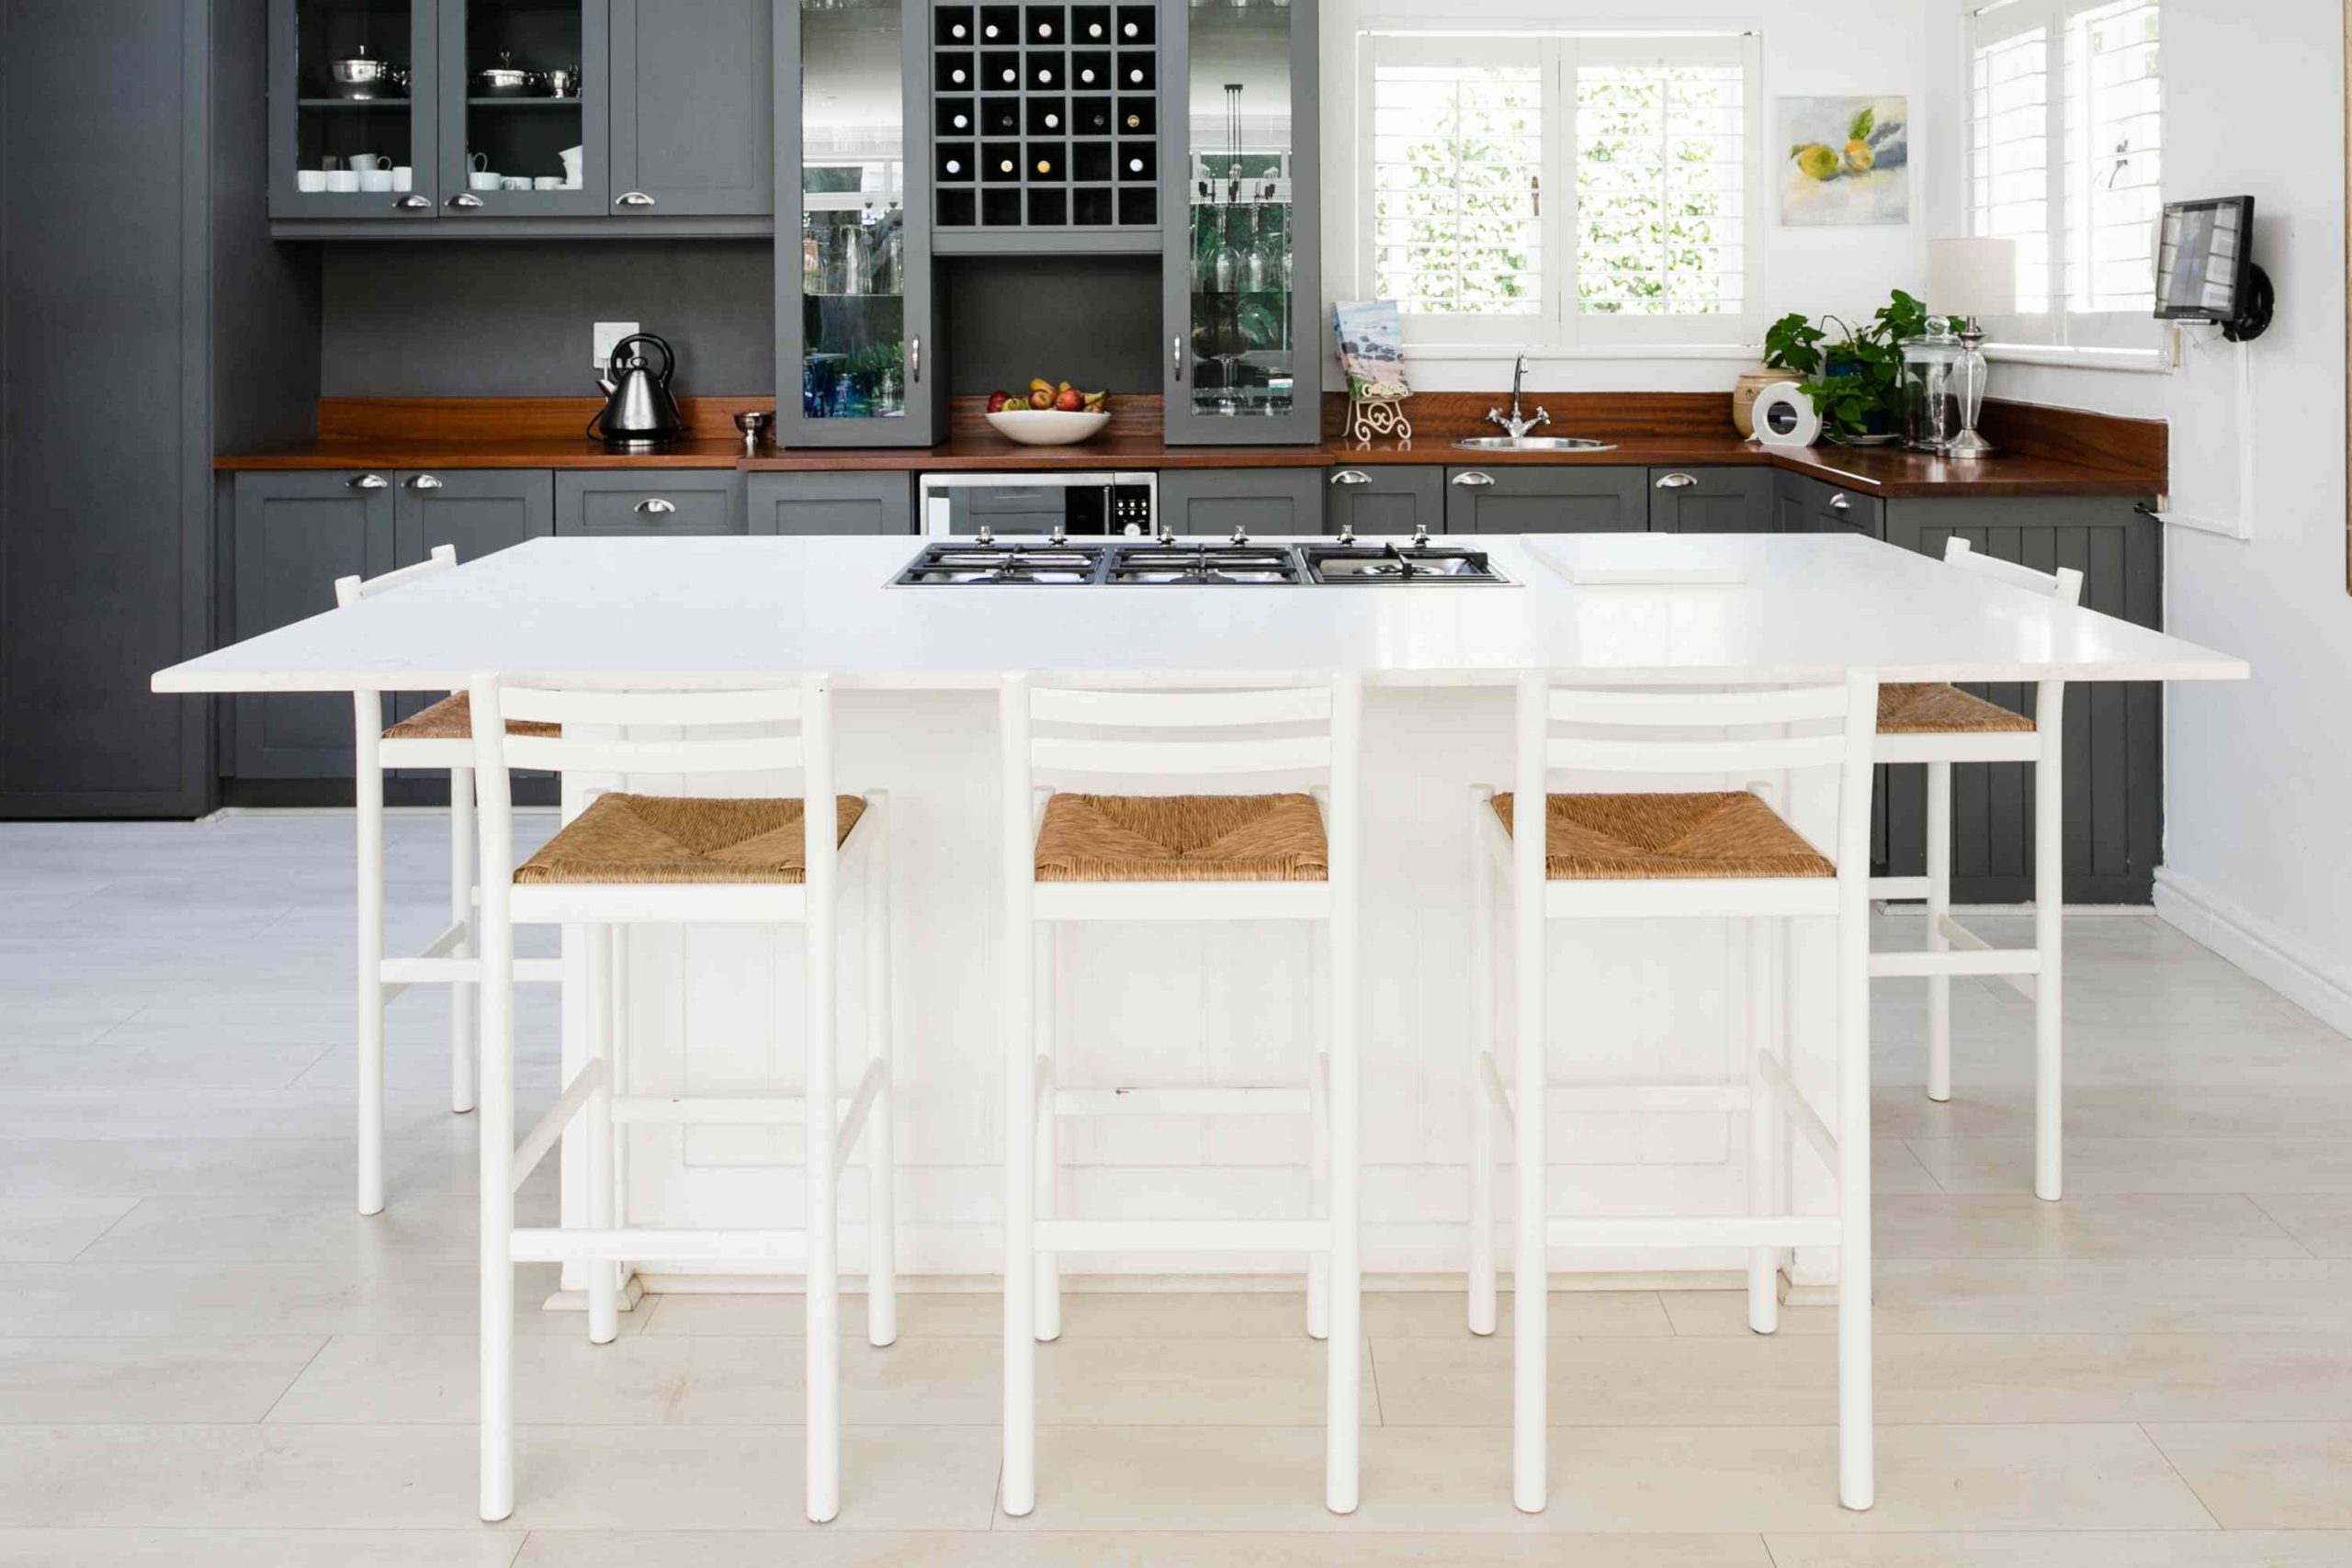 Can You Use Kitchen Cabinets For The Kitchen Island